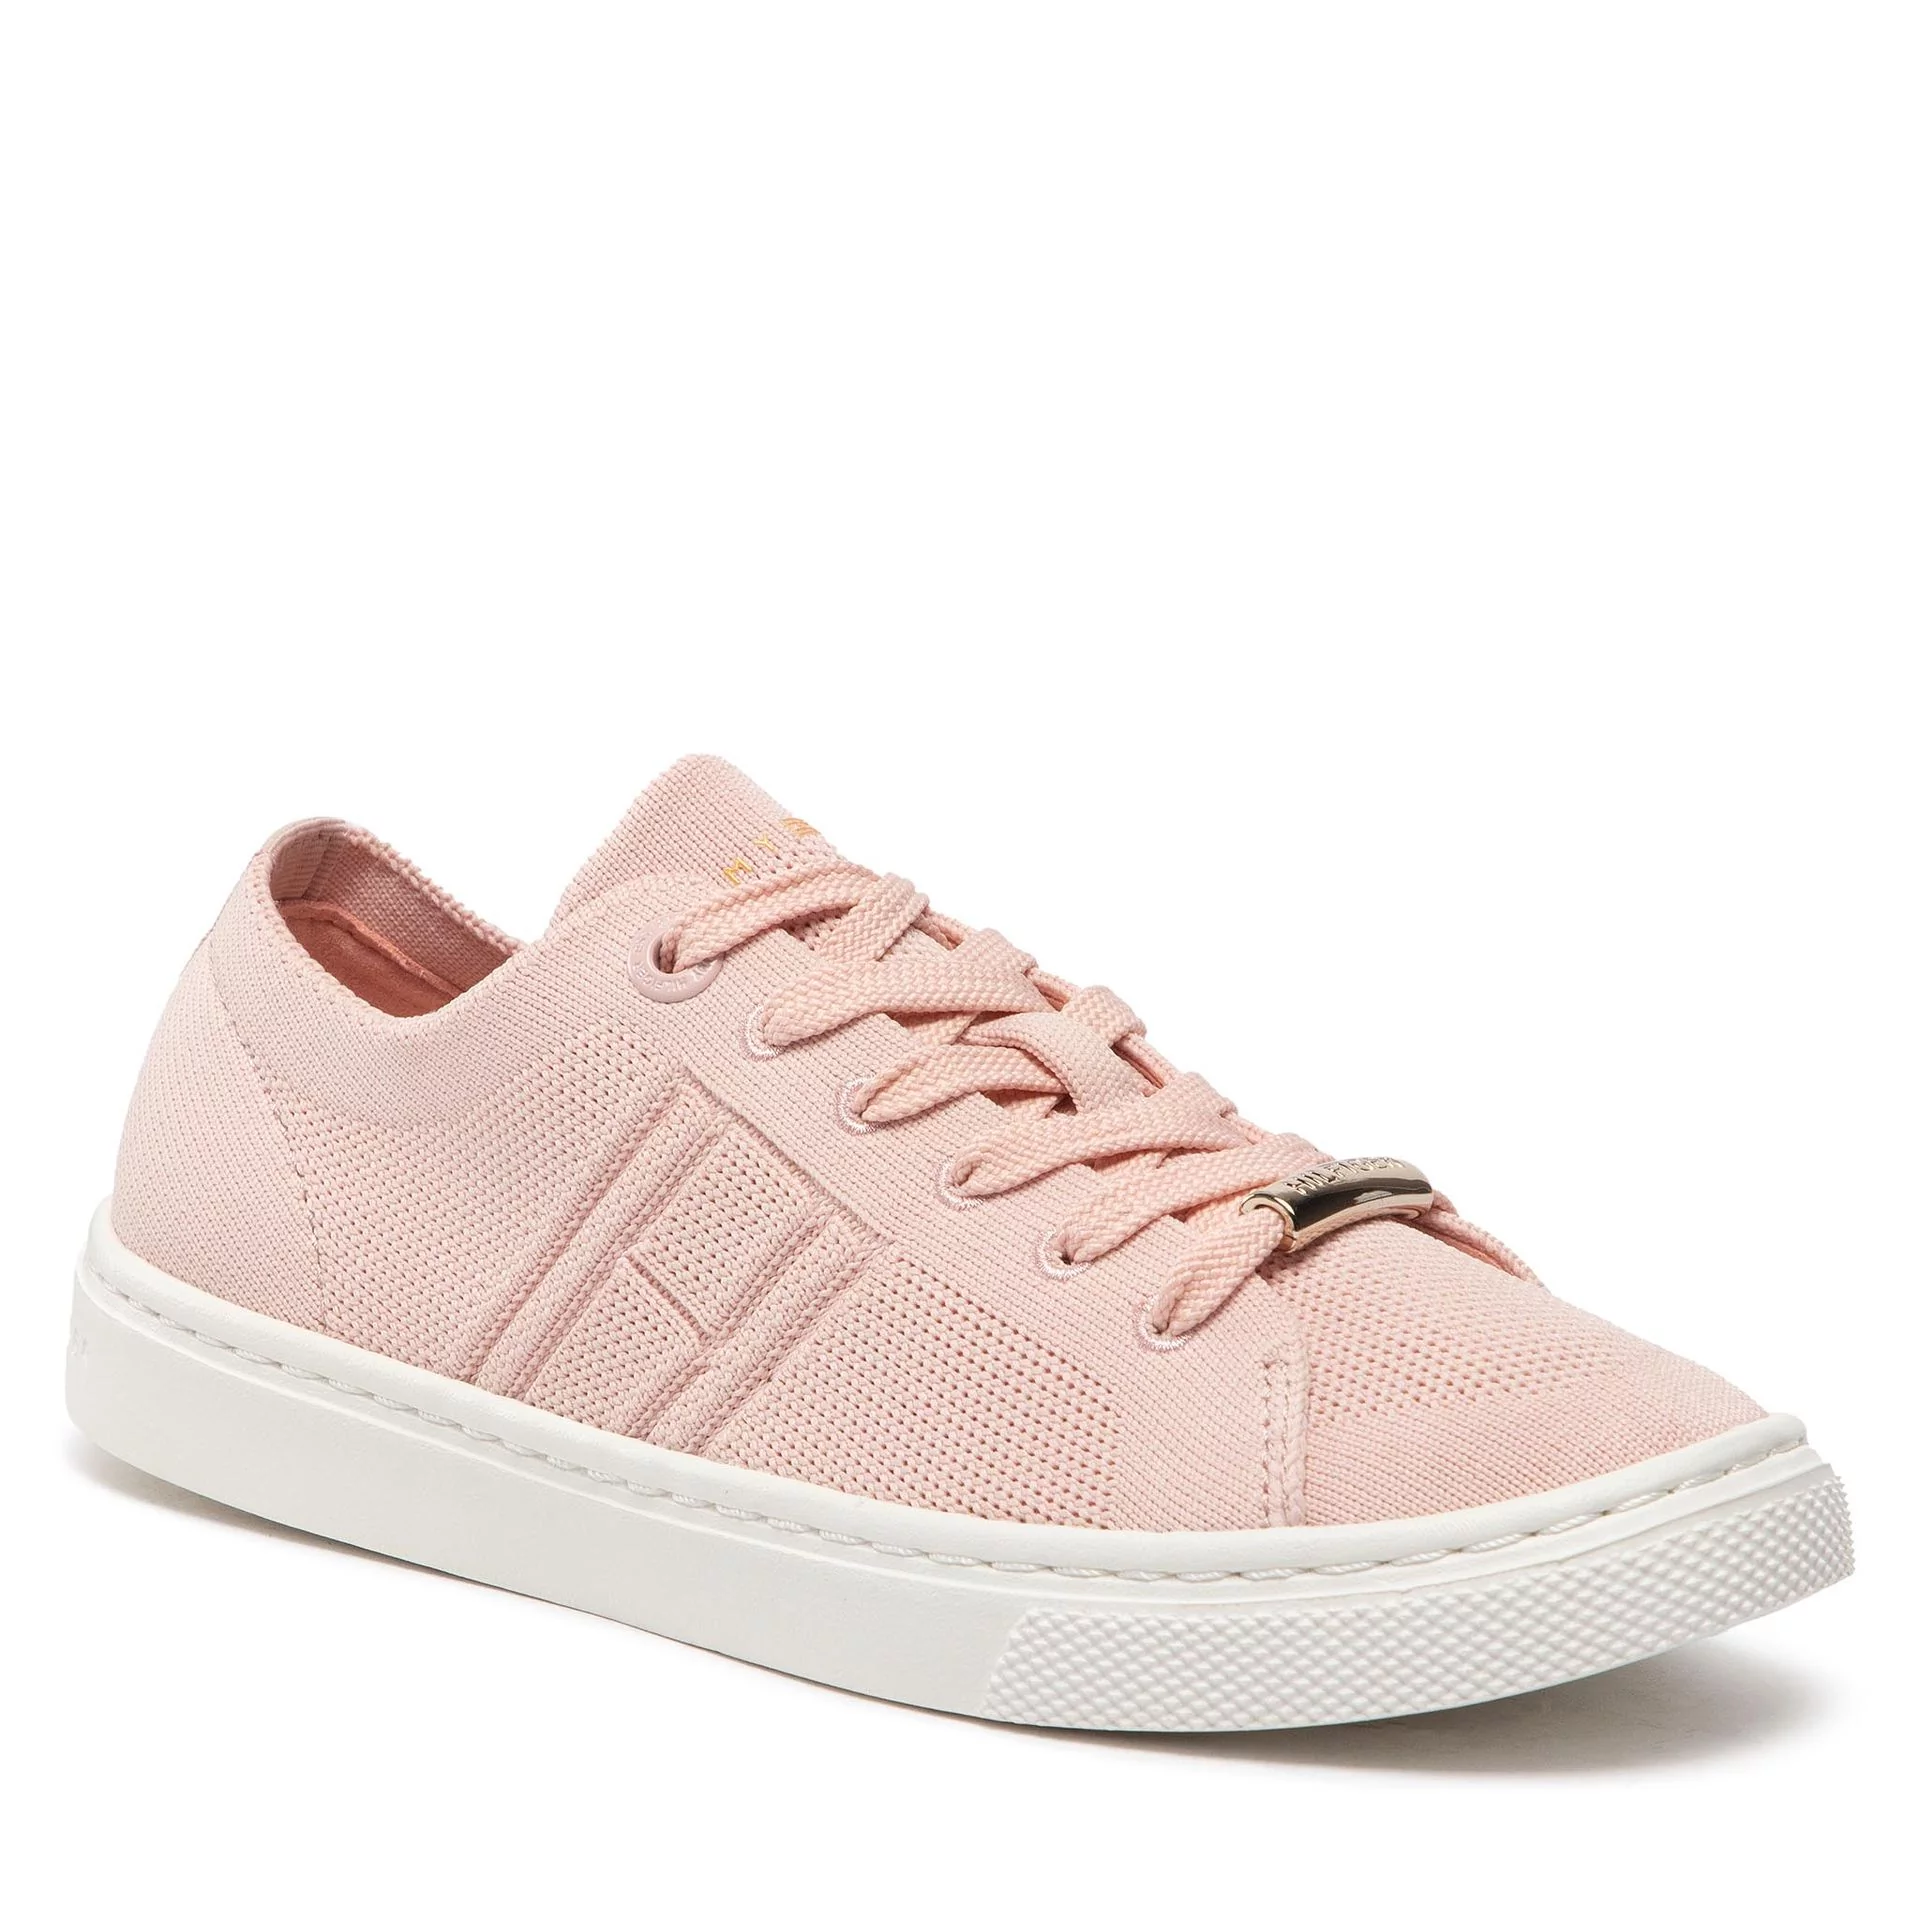 Sneakersy TOMMY HILFIGER - Knitted Light Cupsole FW0FW06332 Sepia Pink TMF  - Ceny i opinie na Skapiec.pl